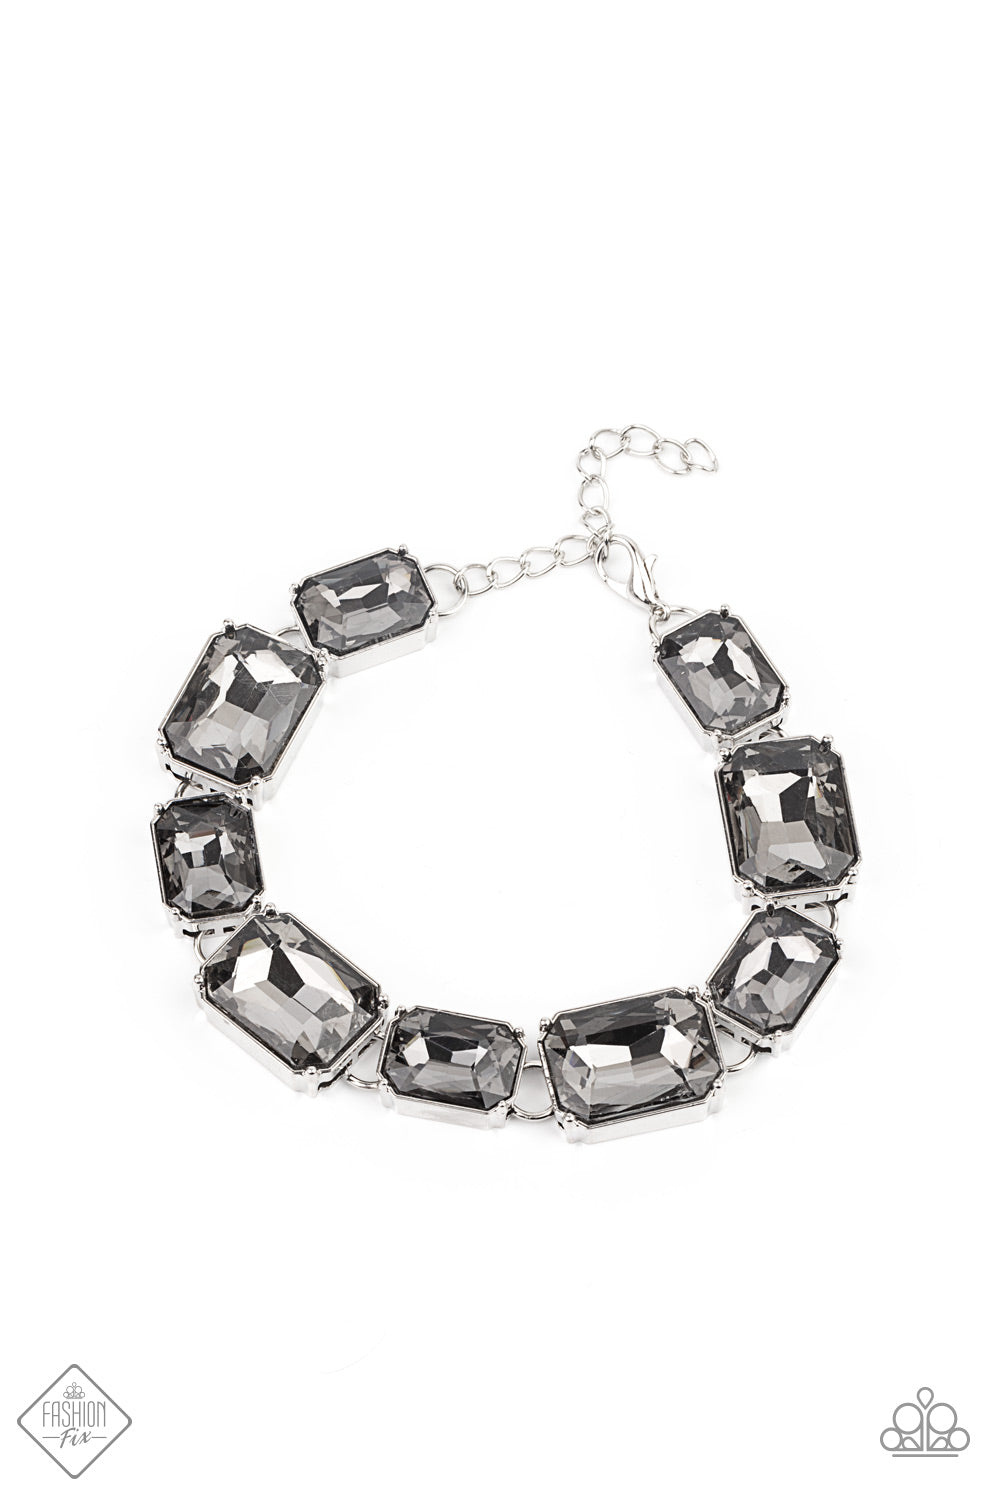 Paparazzi Accessories - After Hours - Silver Bracelet  Fashion Fix January 2021